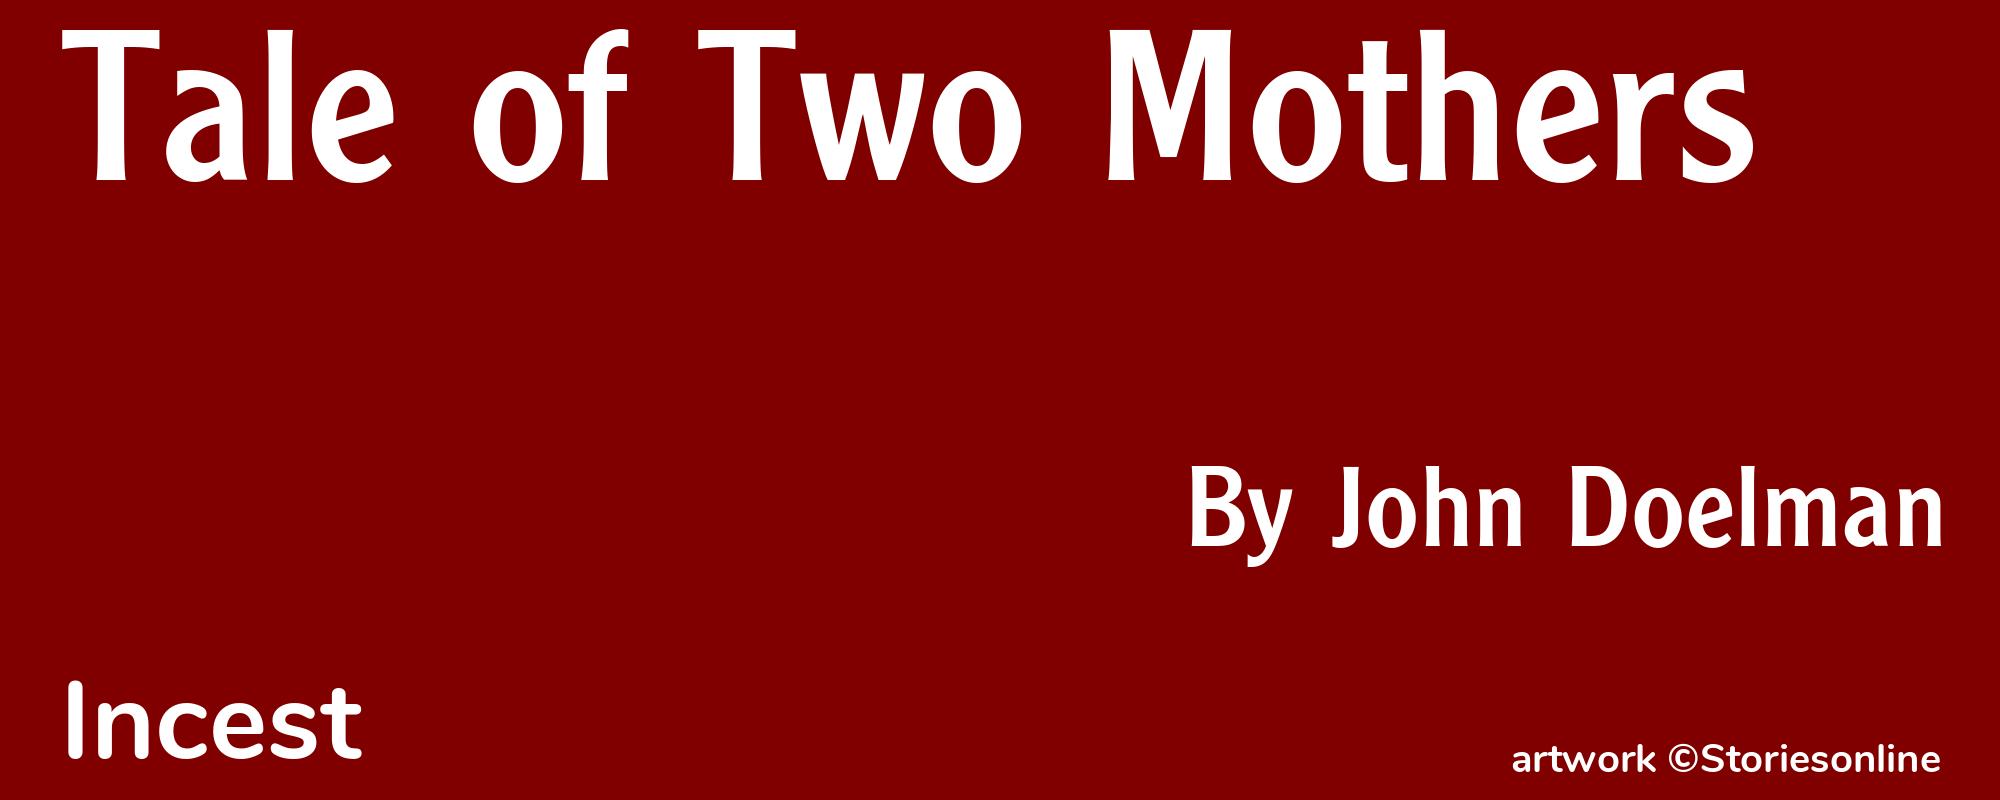 Tale of Two Mothers - Cover